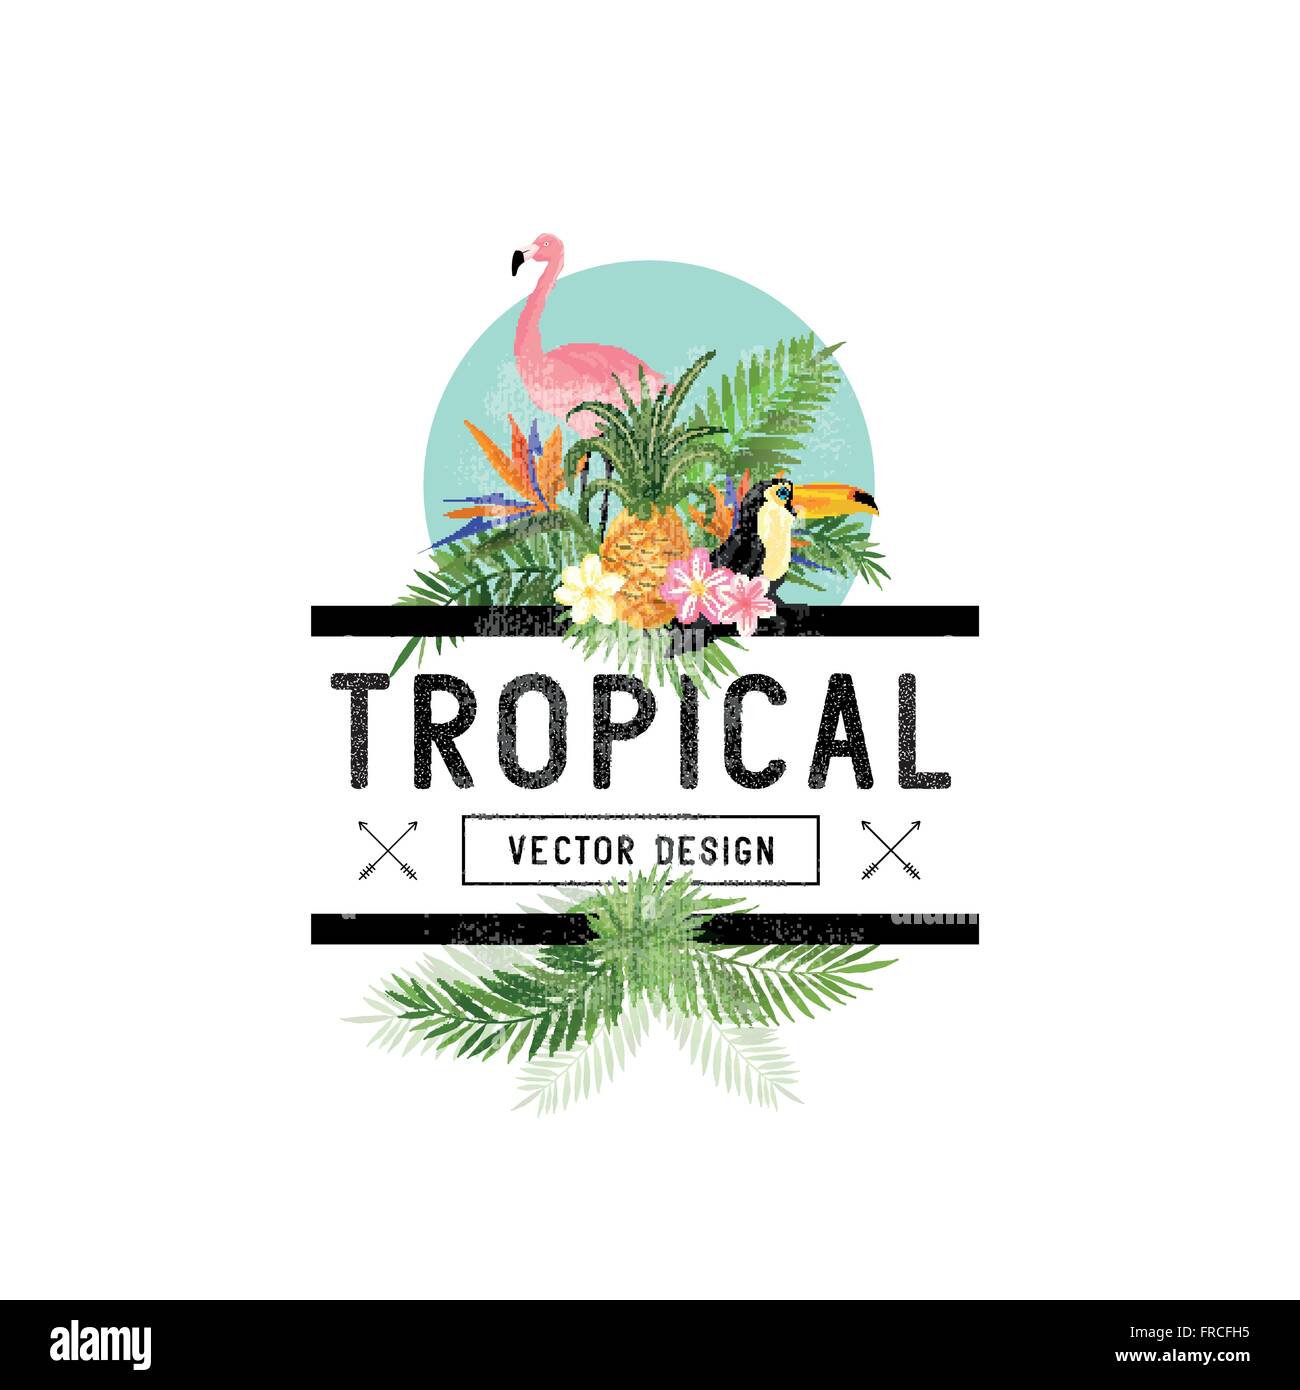 Tropical Design Elements. Various tropical objects including Toucan bird, pineapple and palm leaves. Stock Vector